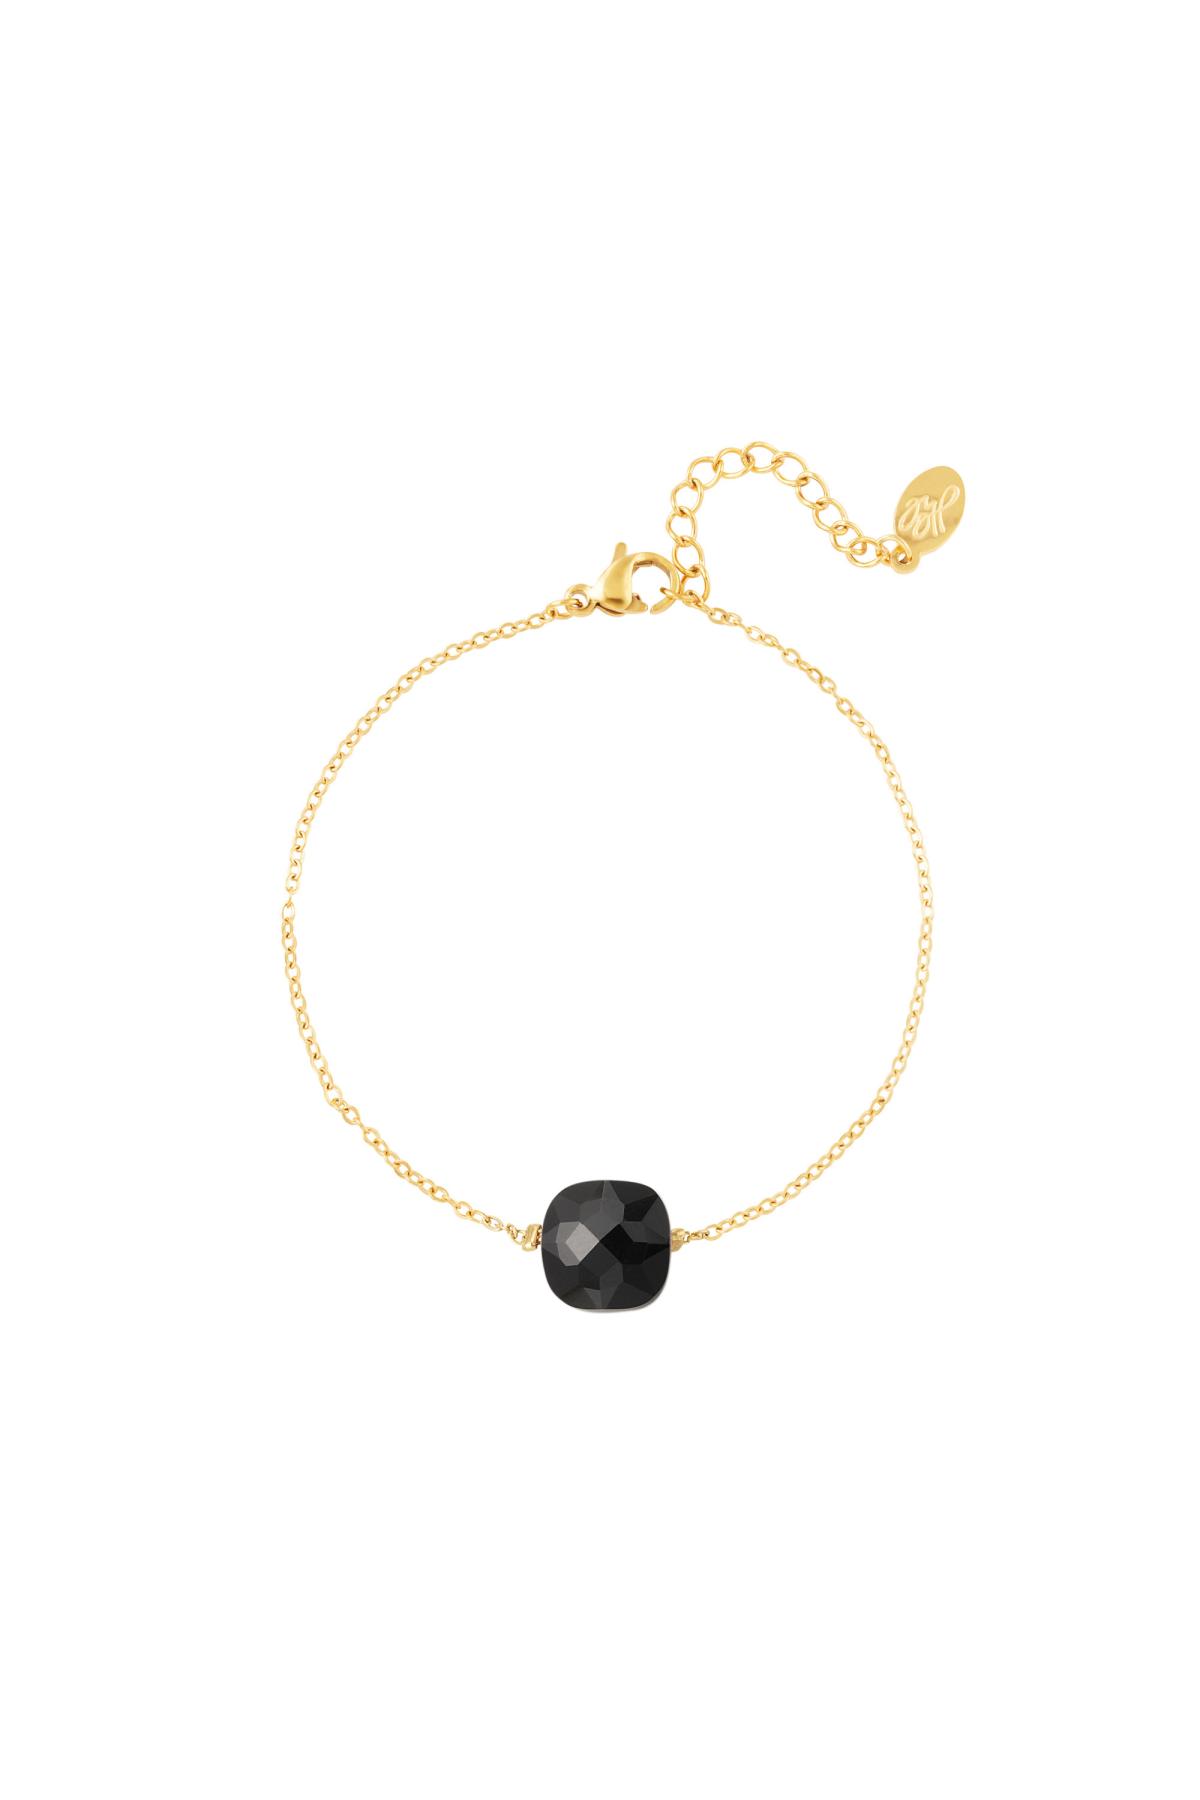 Bracelet with stone - Natural stones collection Black & Gold Stainless Steel h5 